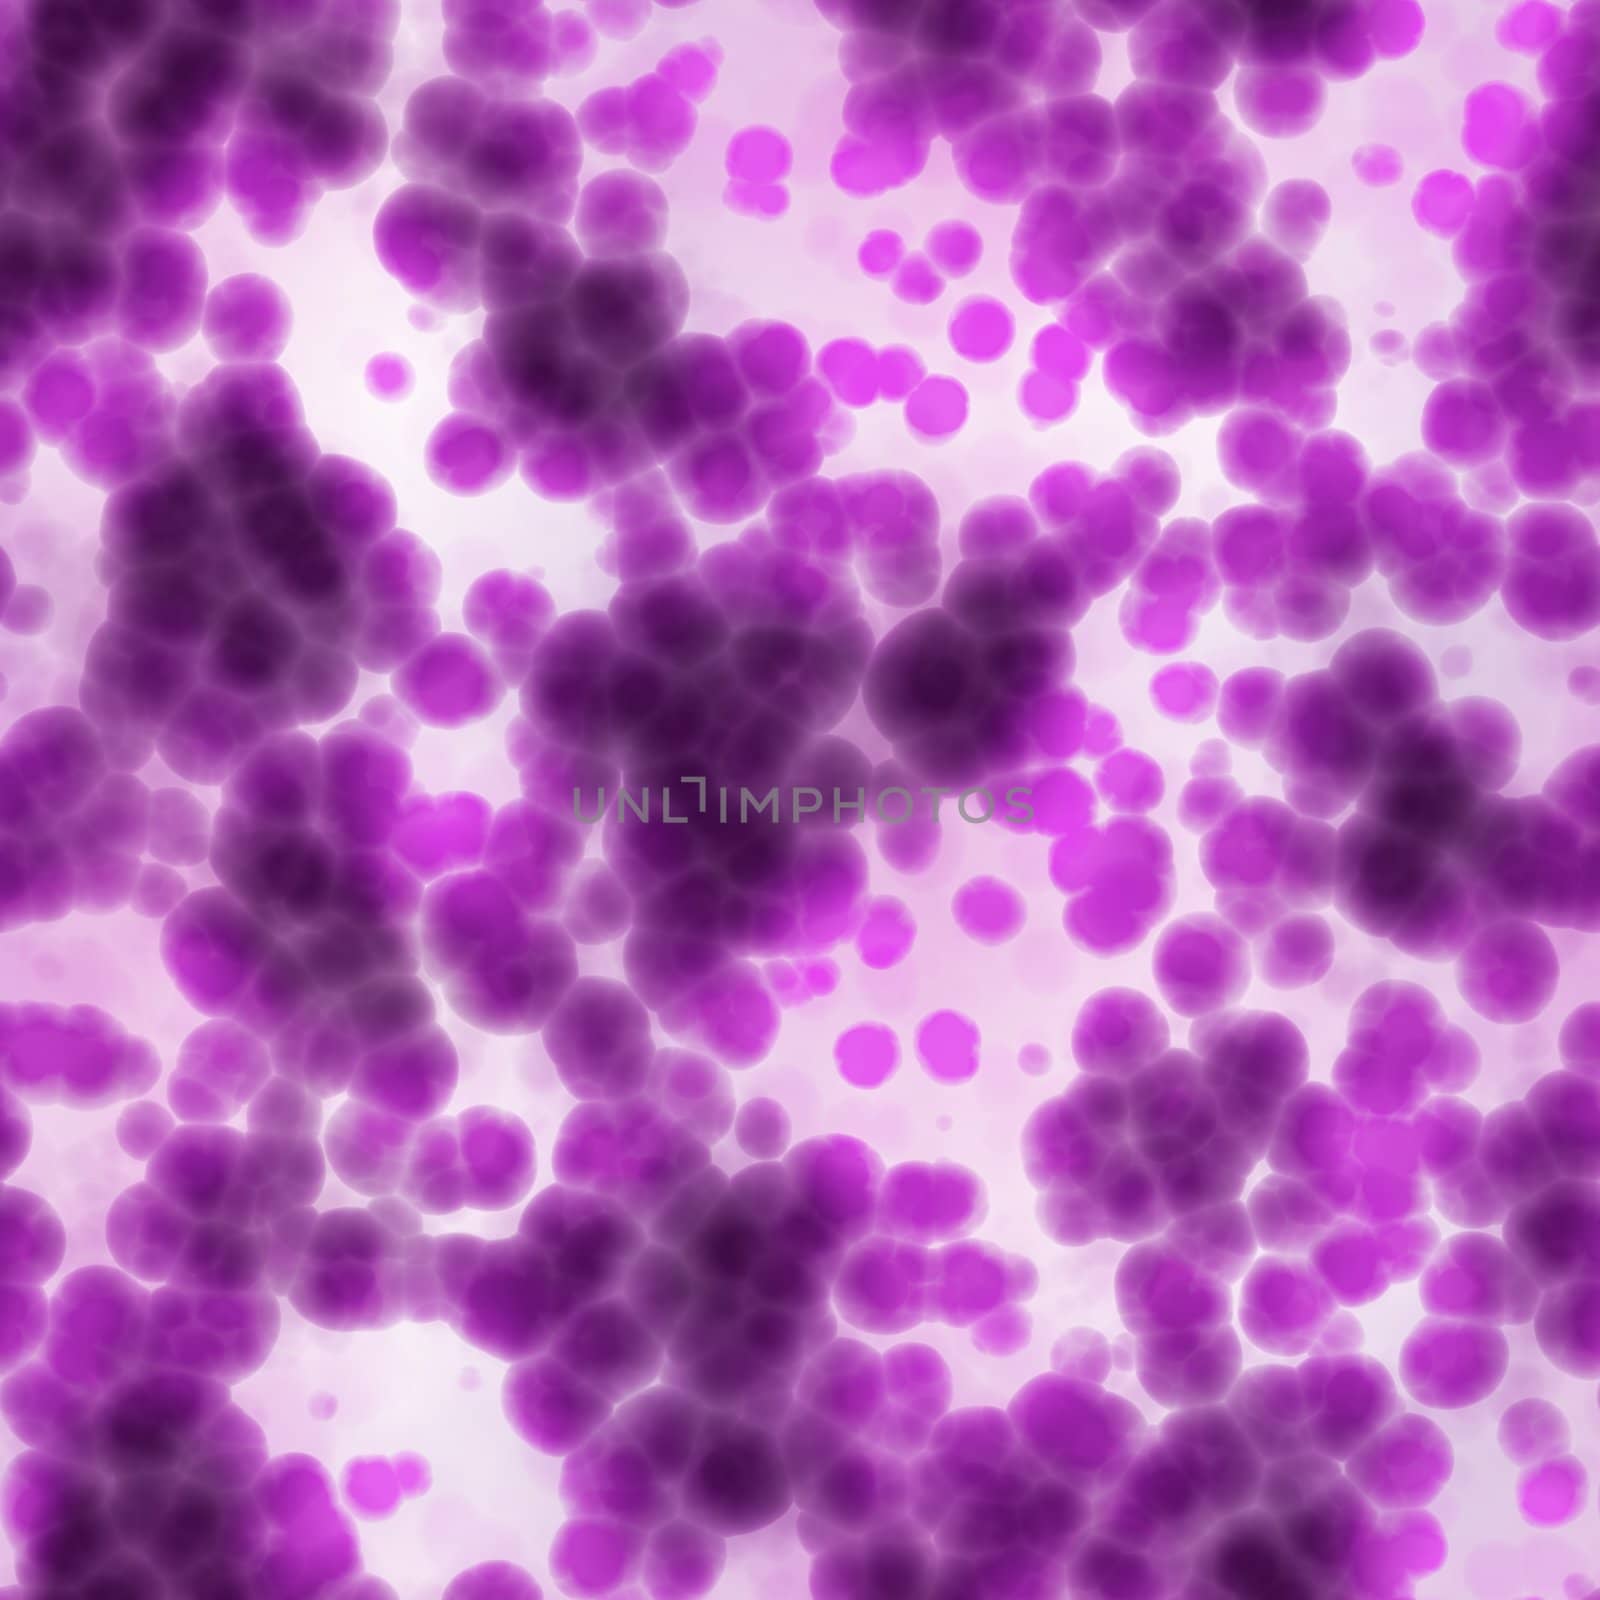 cells close up by clearviewstock